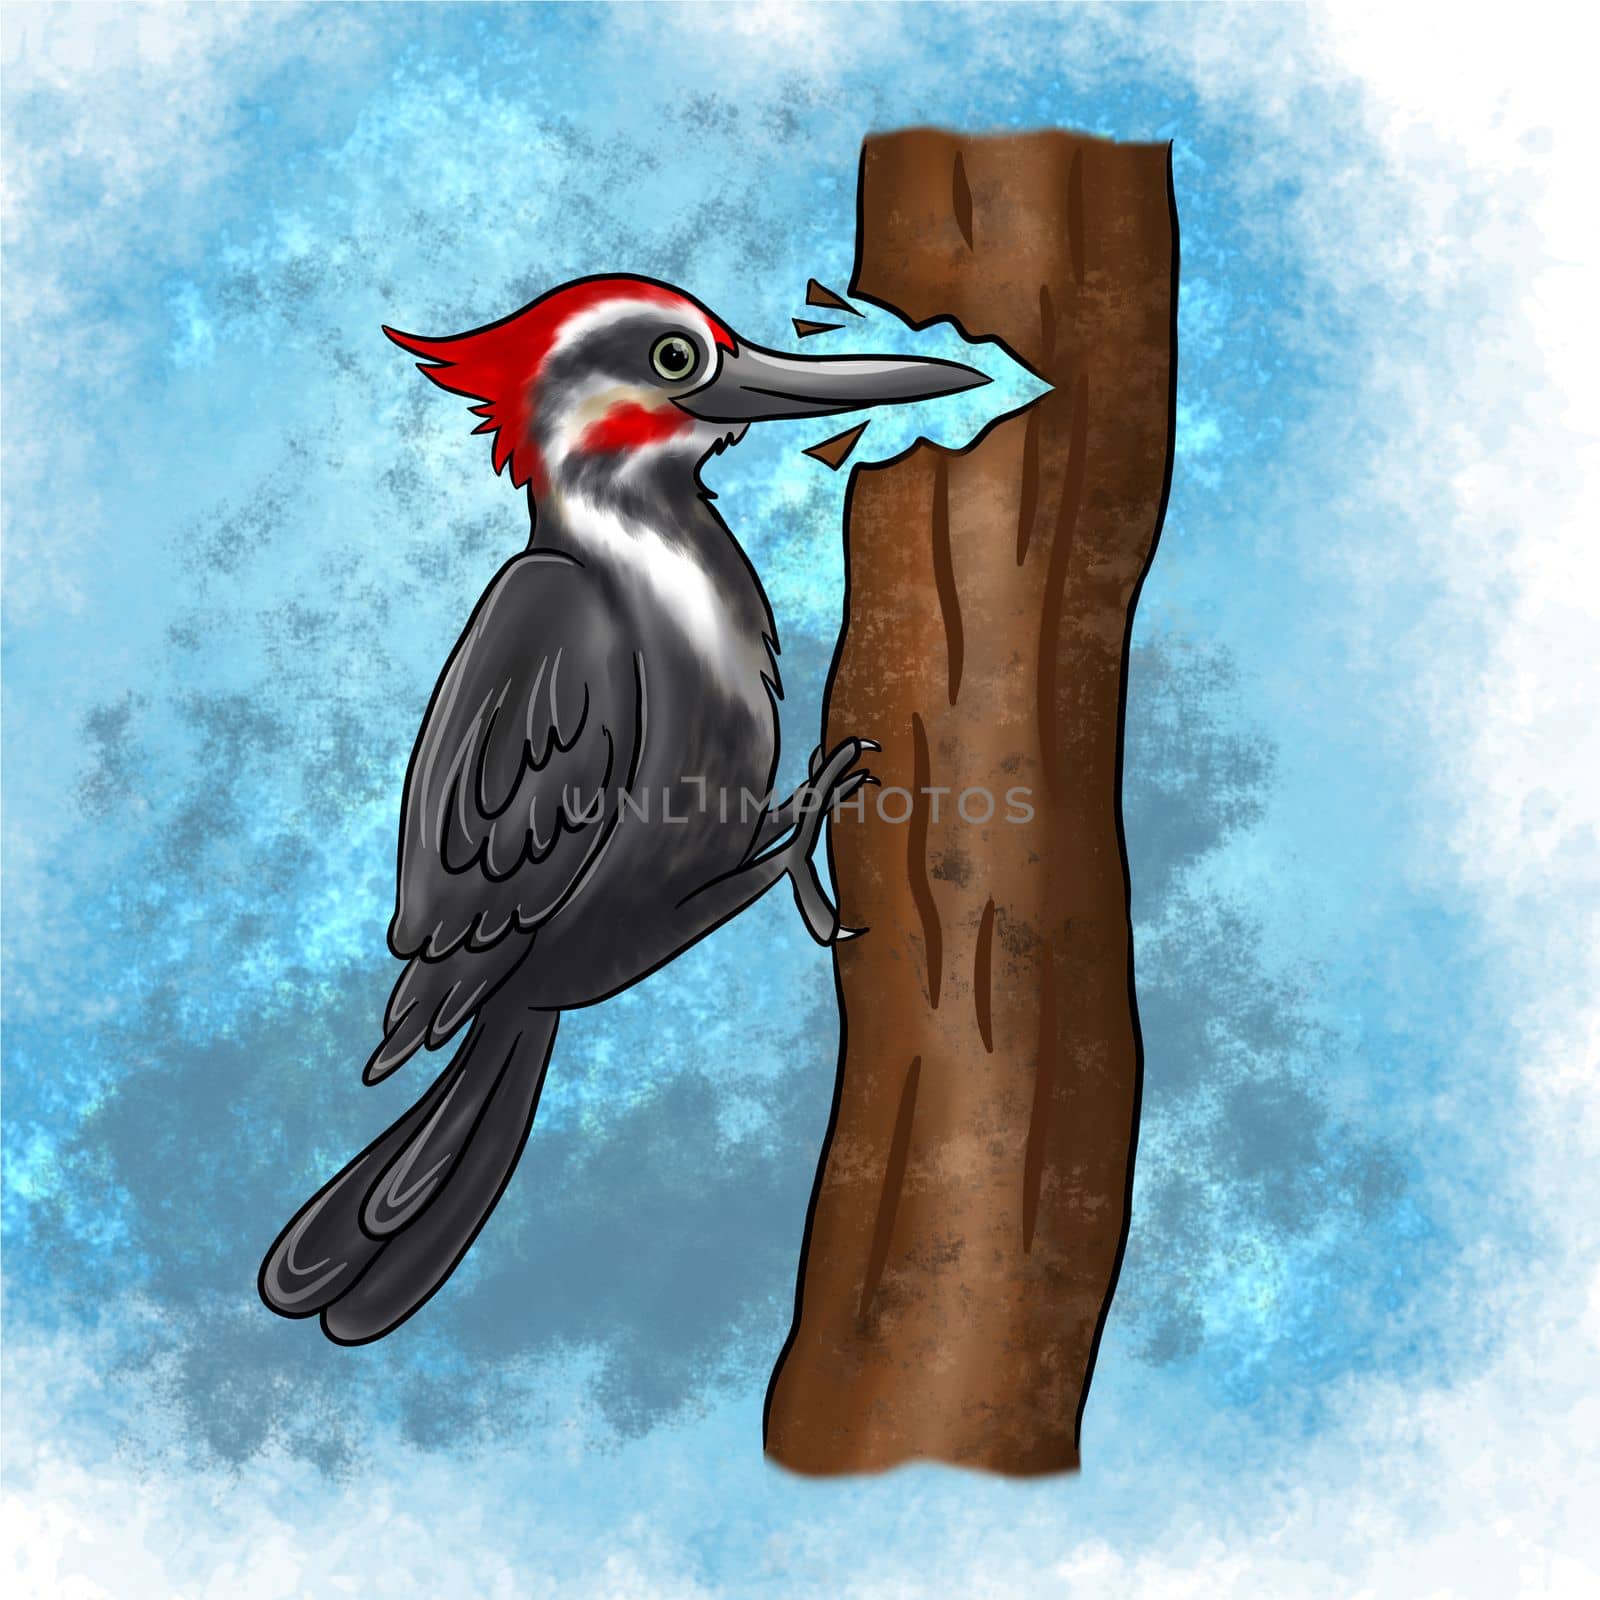 A woodpecker bird pecks at the bark of a tree on an isolated background. Clipart birds. by Alina_Lebed